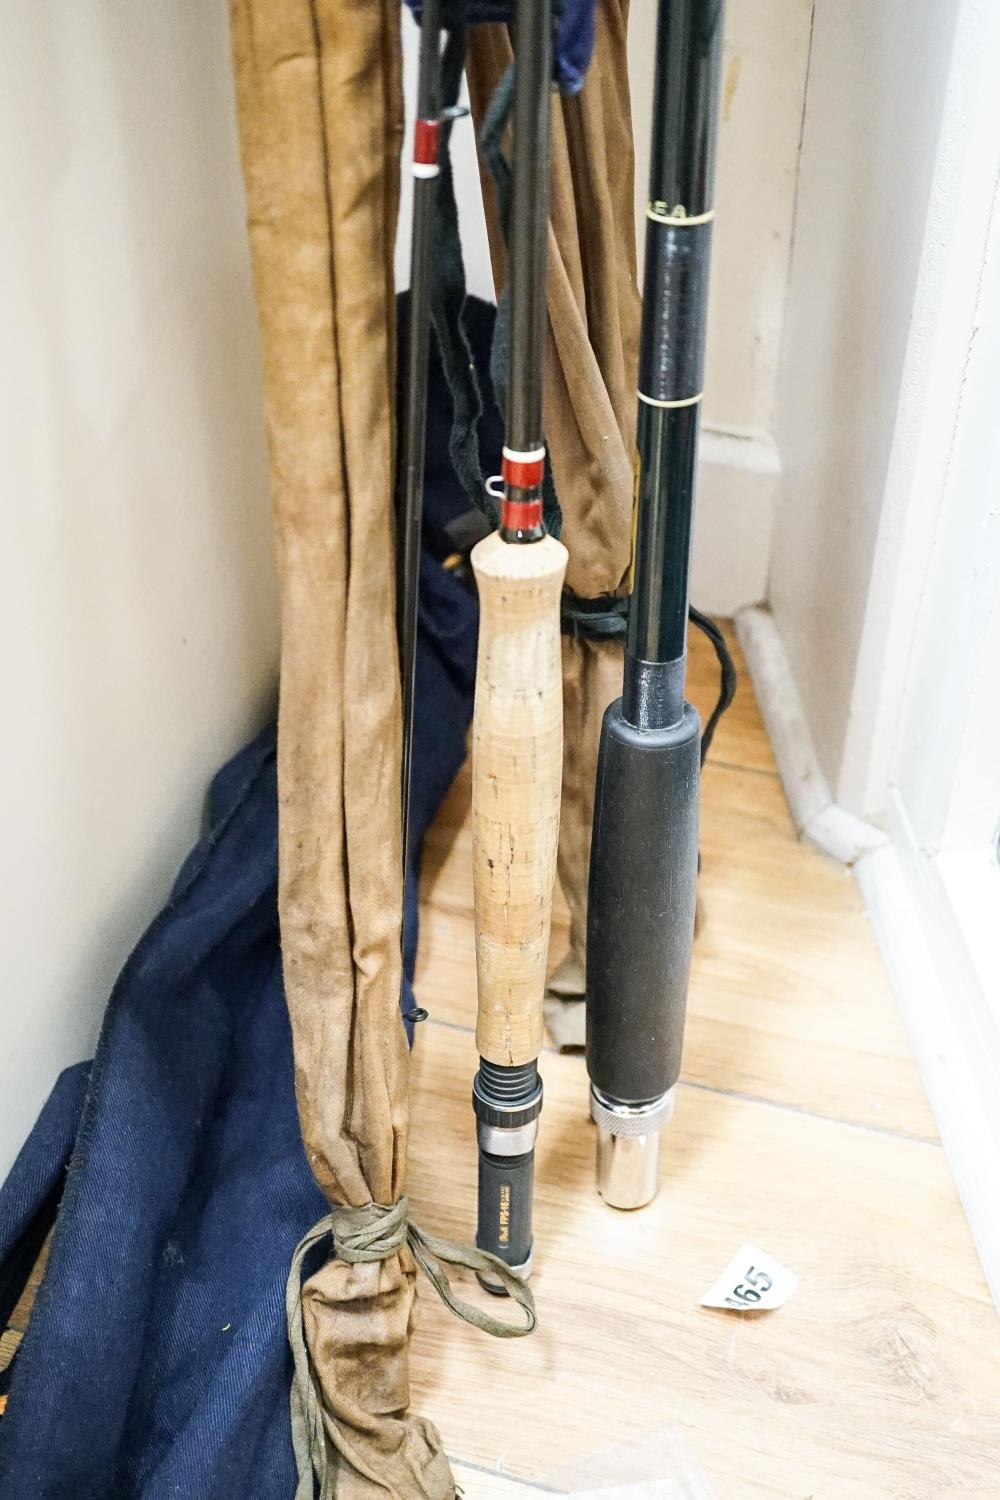 A Sealey octopus cane fishing rod and A Sealey carbon fibre rod, two others, reel and accessories - Image 8 of 9